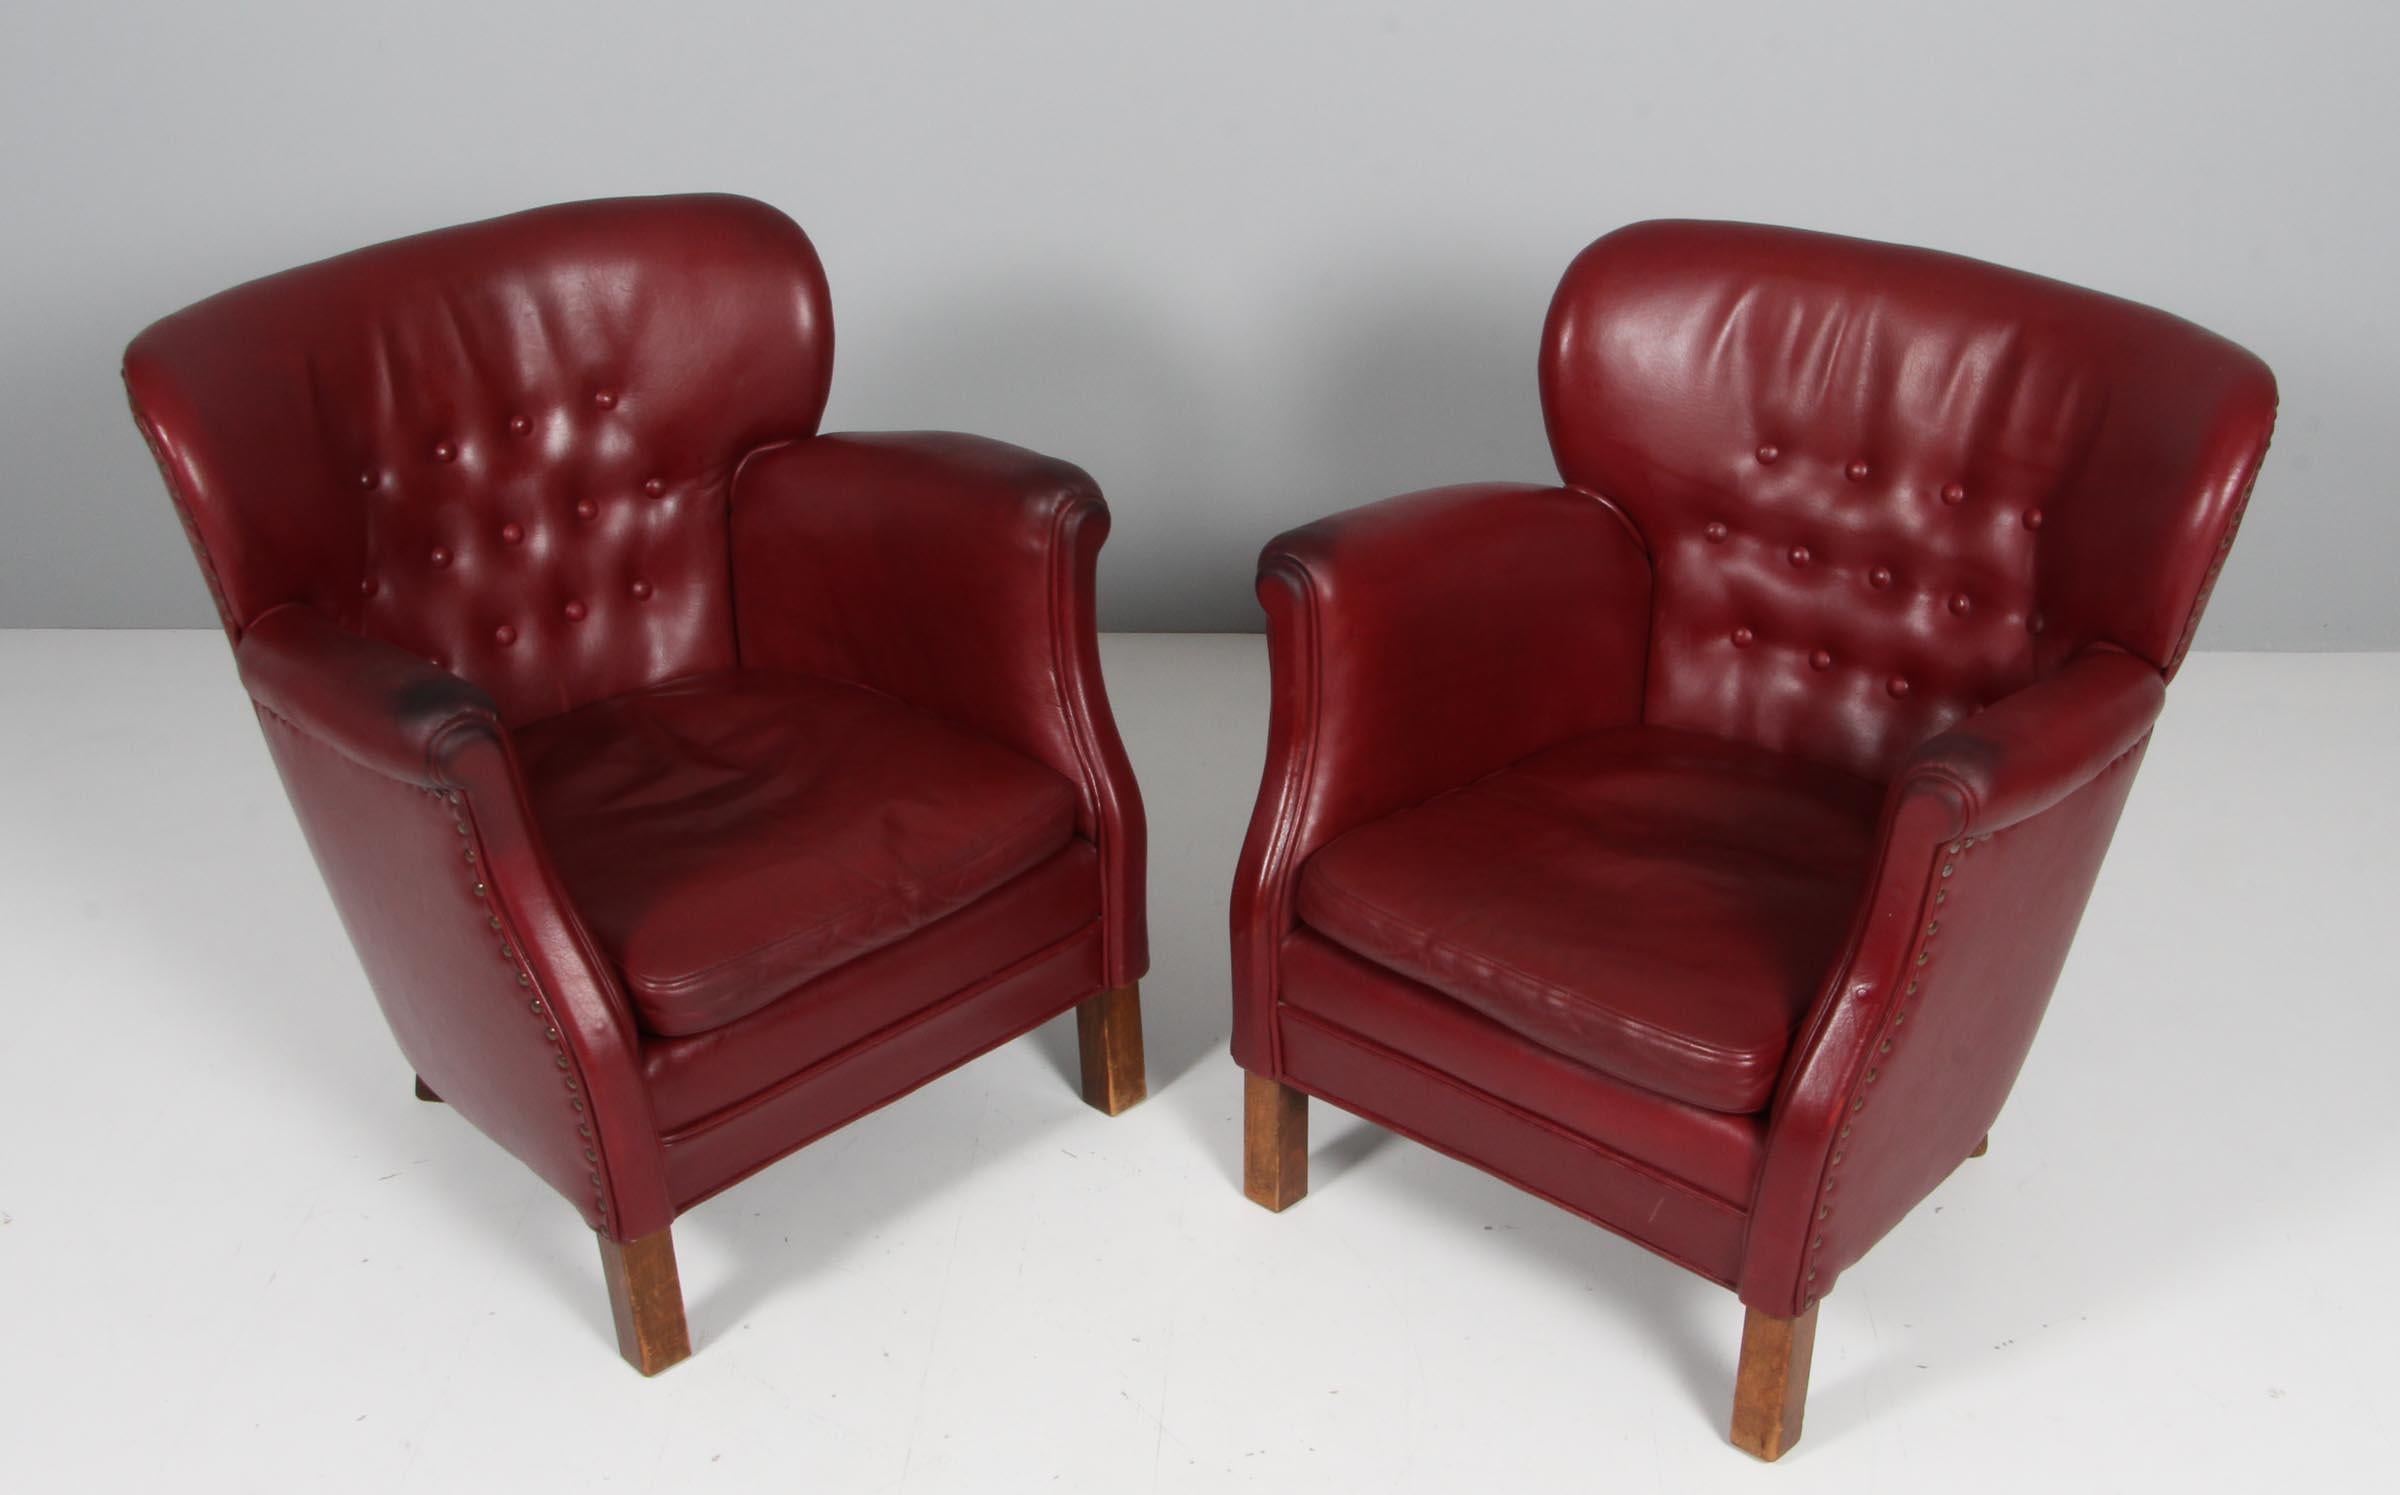 Danish cabinetmaker club chair in original red leather.

With buttons.

Legs of stained beech.

Made in the 1940s.